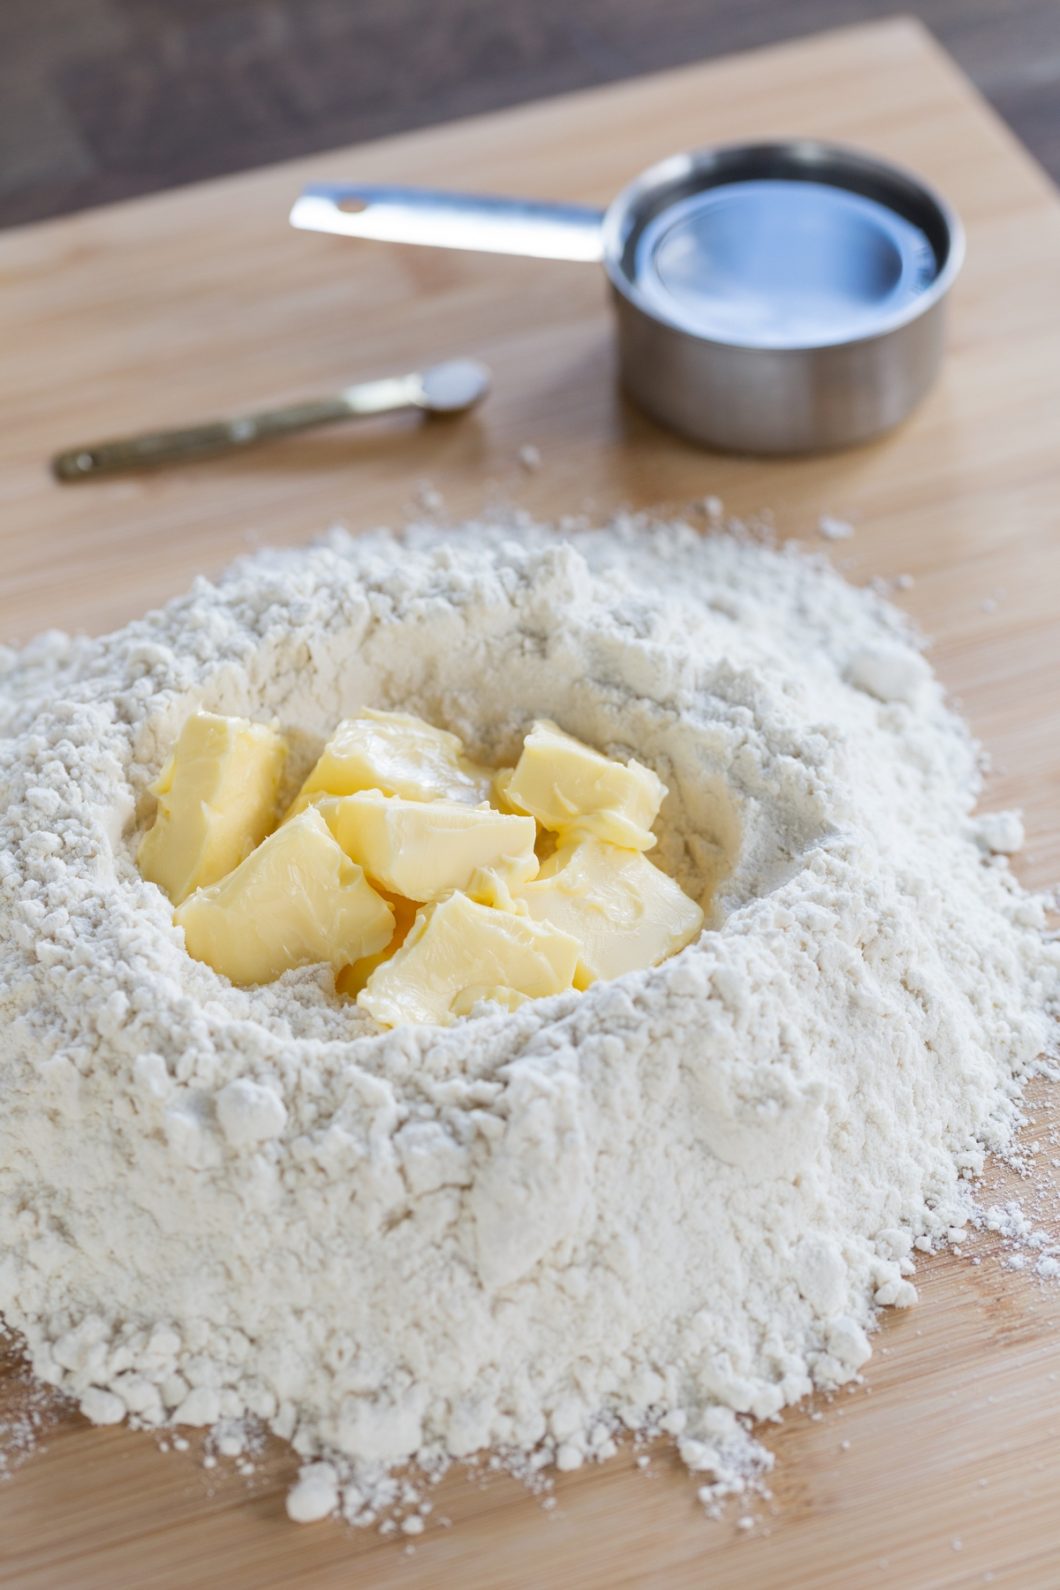 Mound of flour on a wooden surface, with cubed butter in the middle.